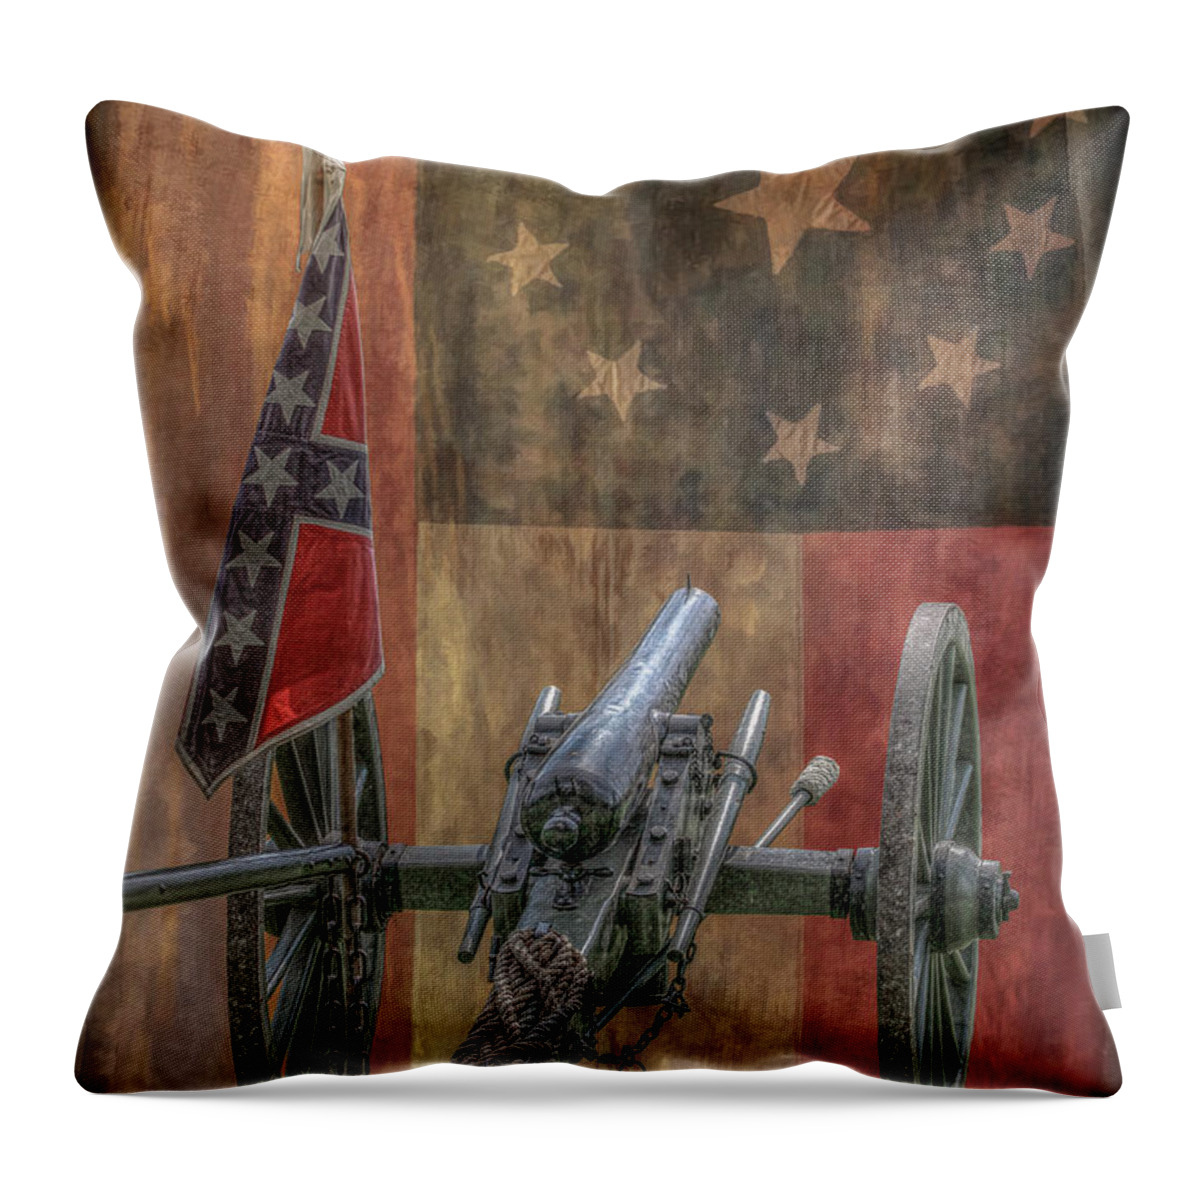 Flags Of The Confederacy Throw Pillow featuring the digital art Flags of the Confederacy by Randy Steele